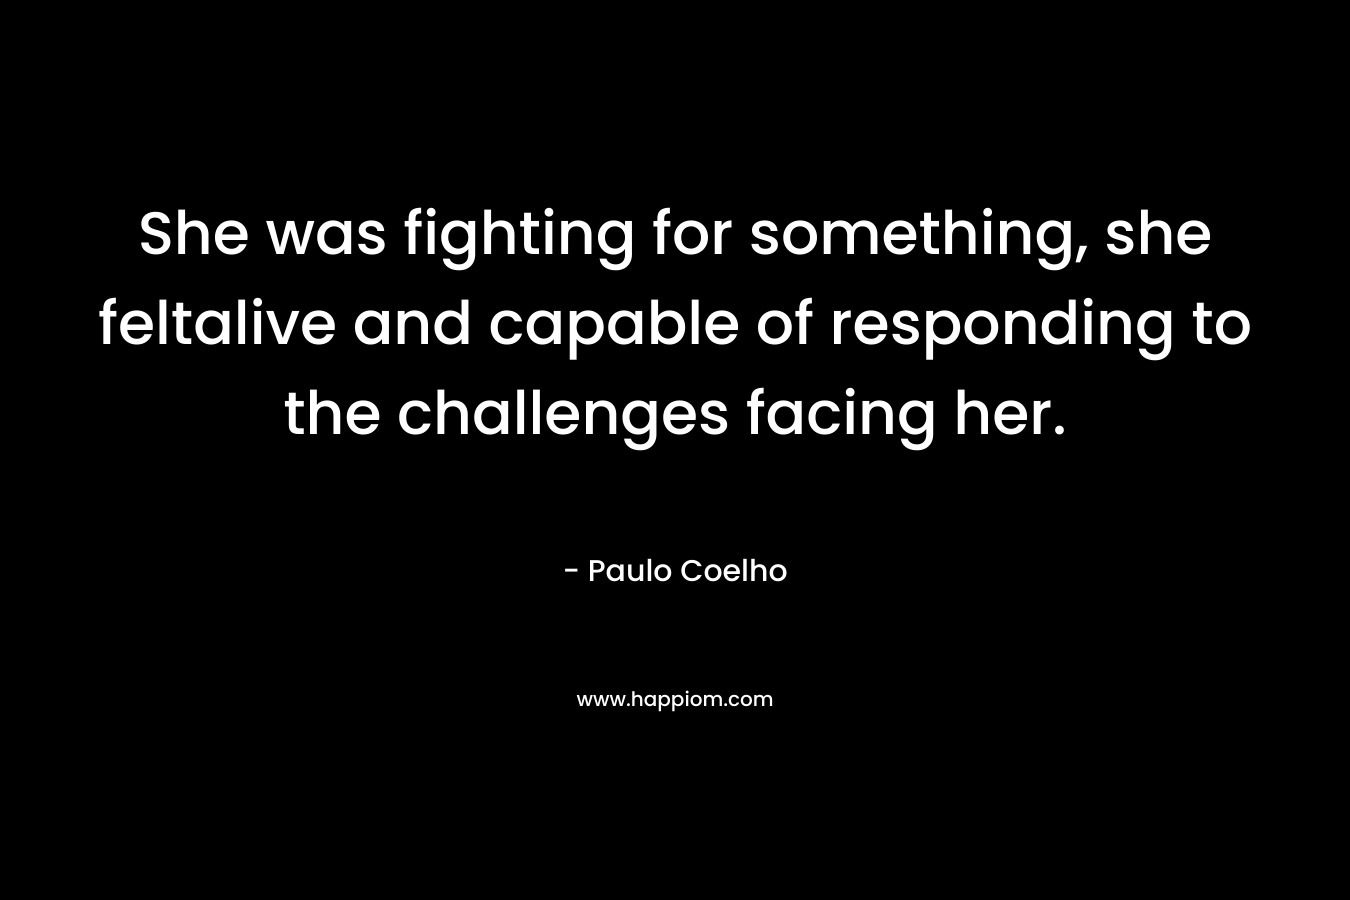 She was fighting for something, she feltalive and capable of responding to the challenges facing her. – Paulo Coelho